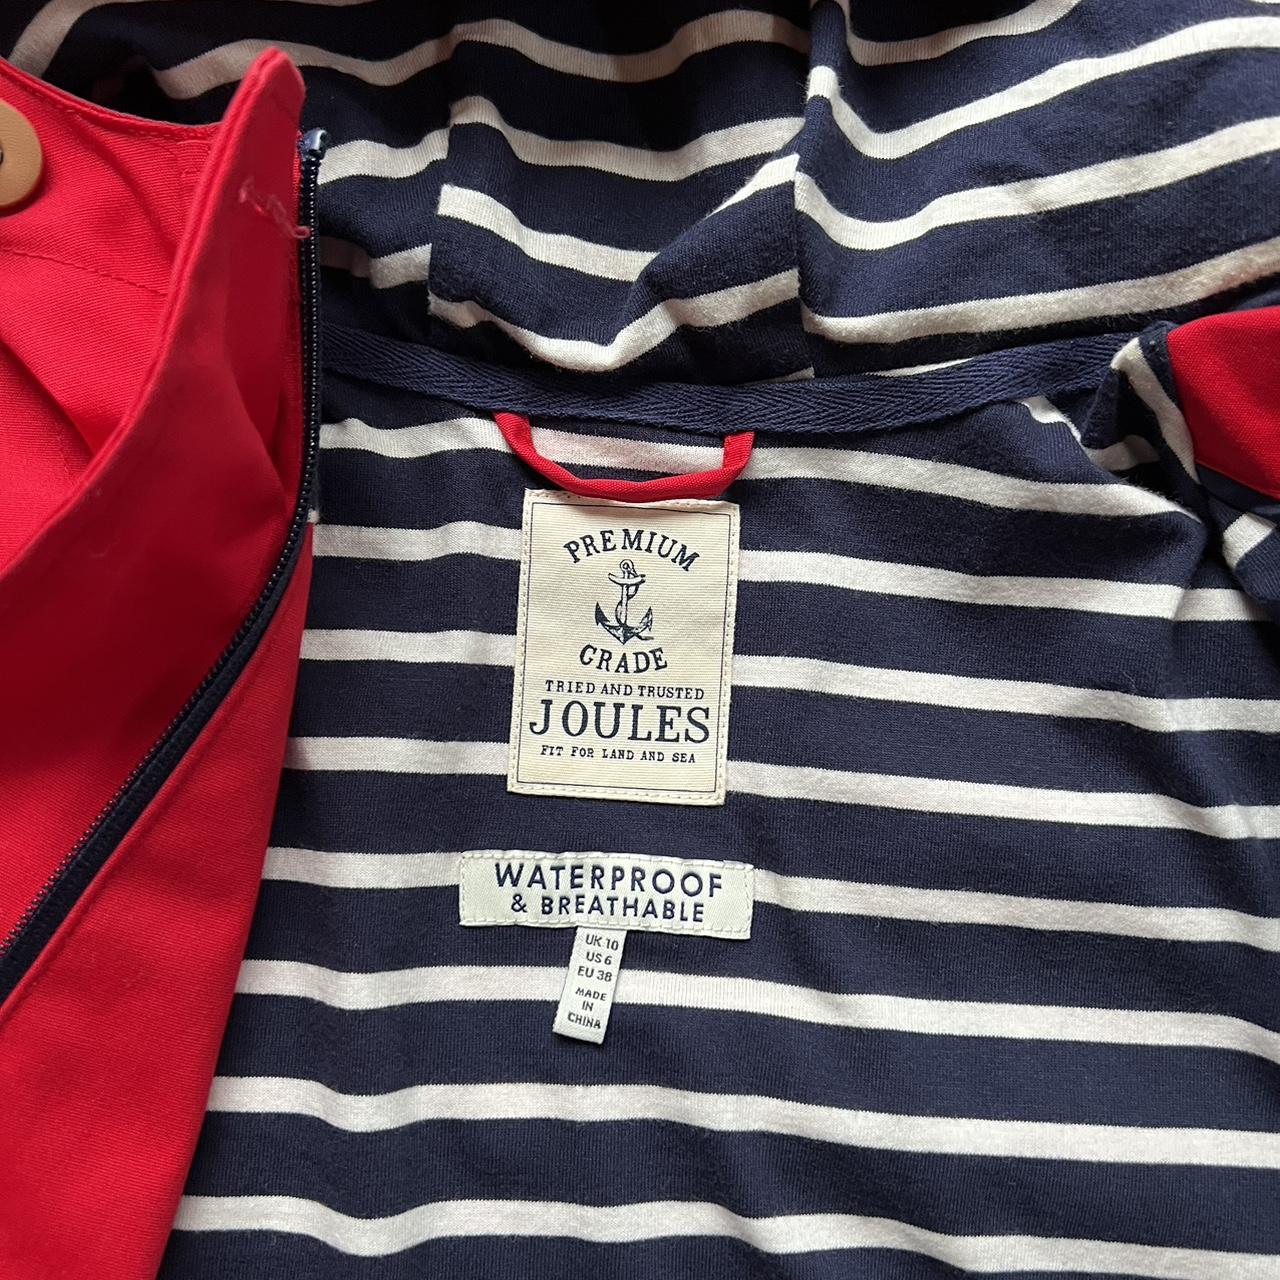 Joules Women's Navy and Red Coat (4)